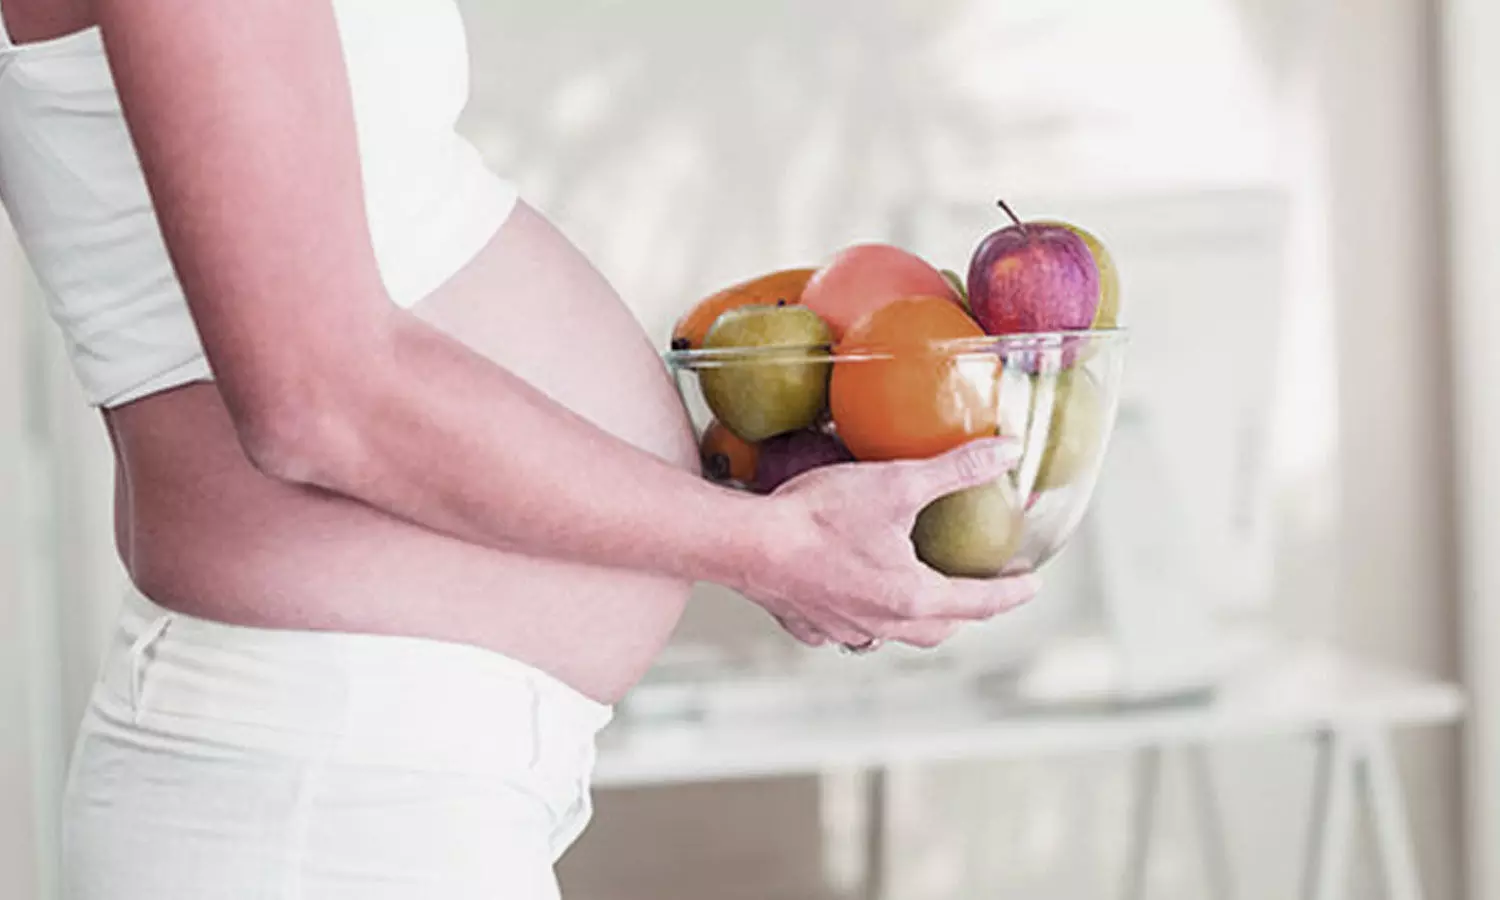 Fruits and vegetable consumption during pregnancy may prevent gestational diabetes: Study